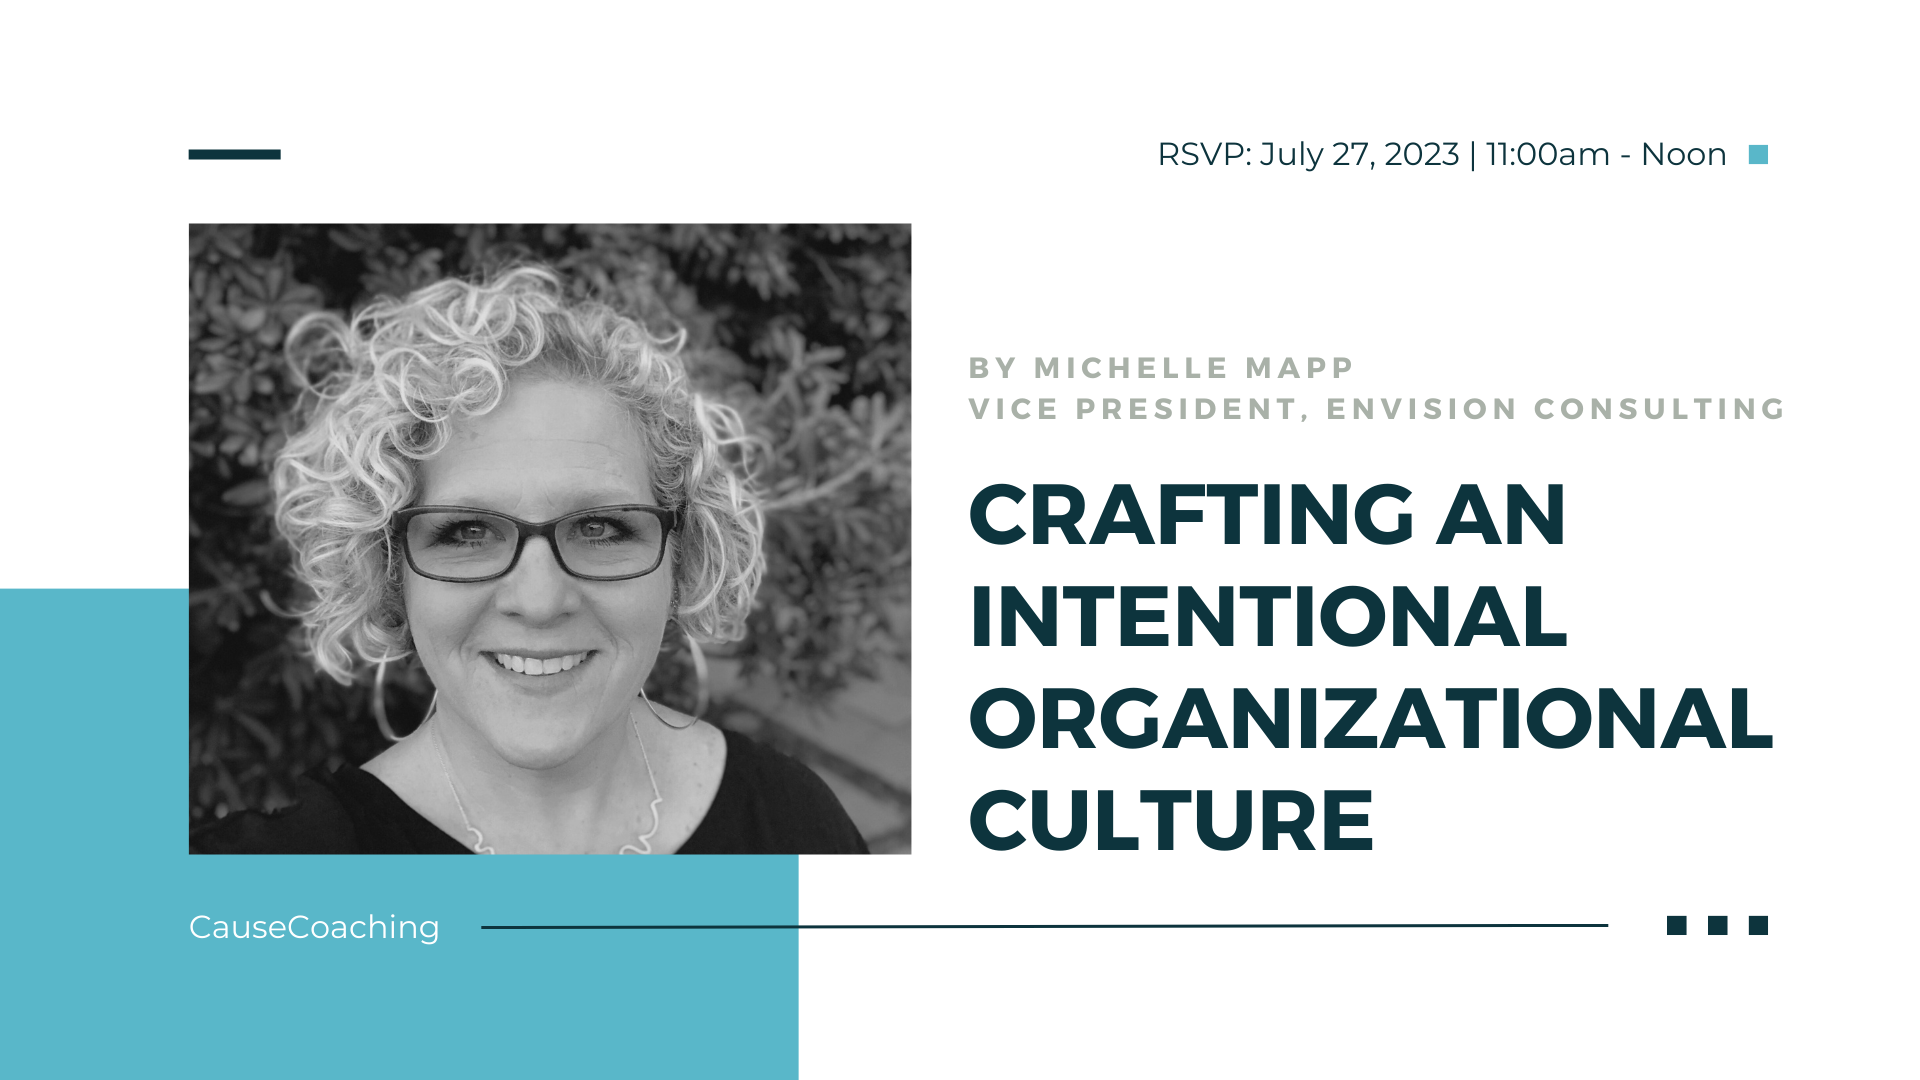 Crafting an Intentional Organizational Culture